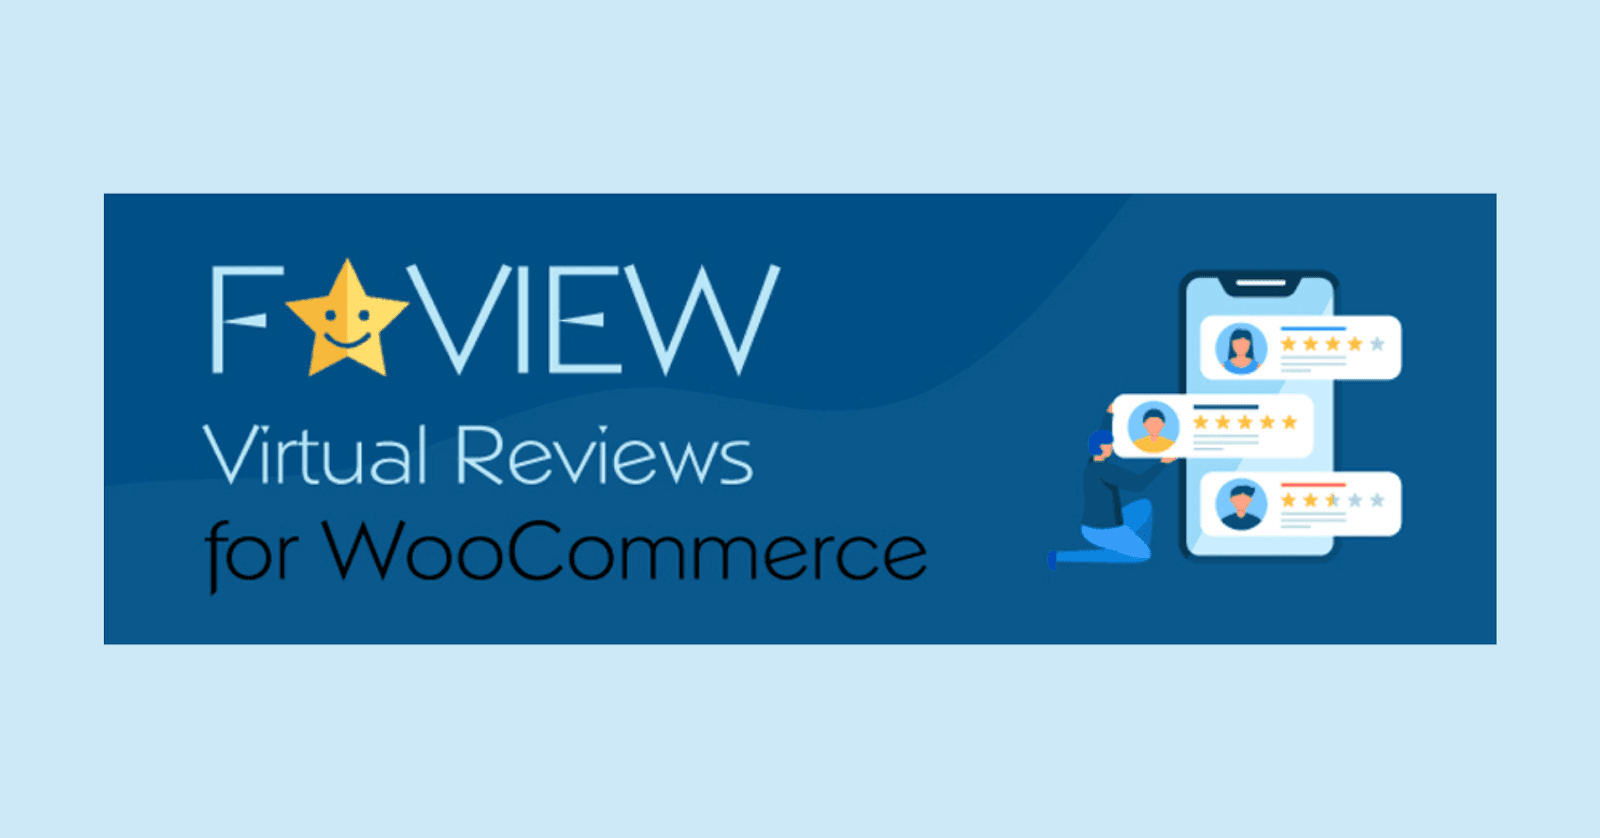 Faview – Virtual Reviews for WooCommerce